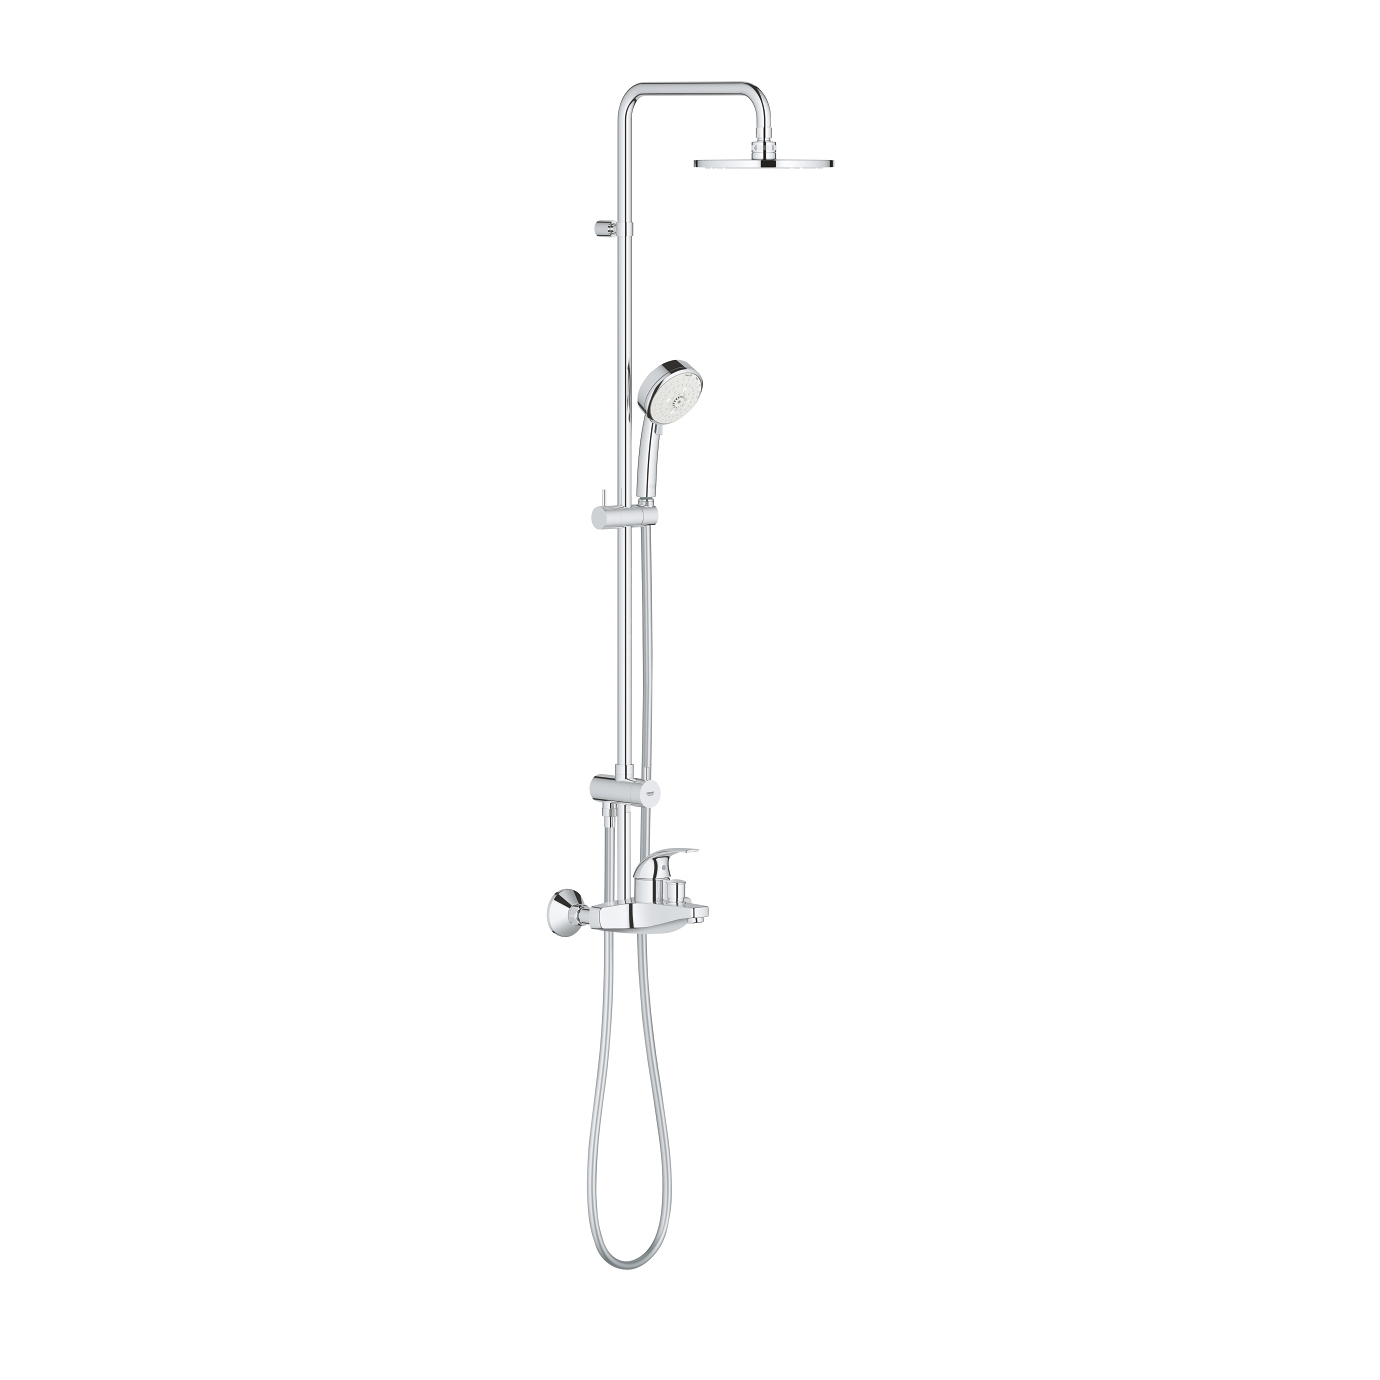 Душевая стойка Grohe New Tempesta Cosmopolitan System 26305001 душевая стойка grohe tempesta rustic system 200 27399002